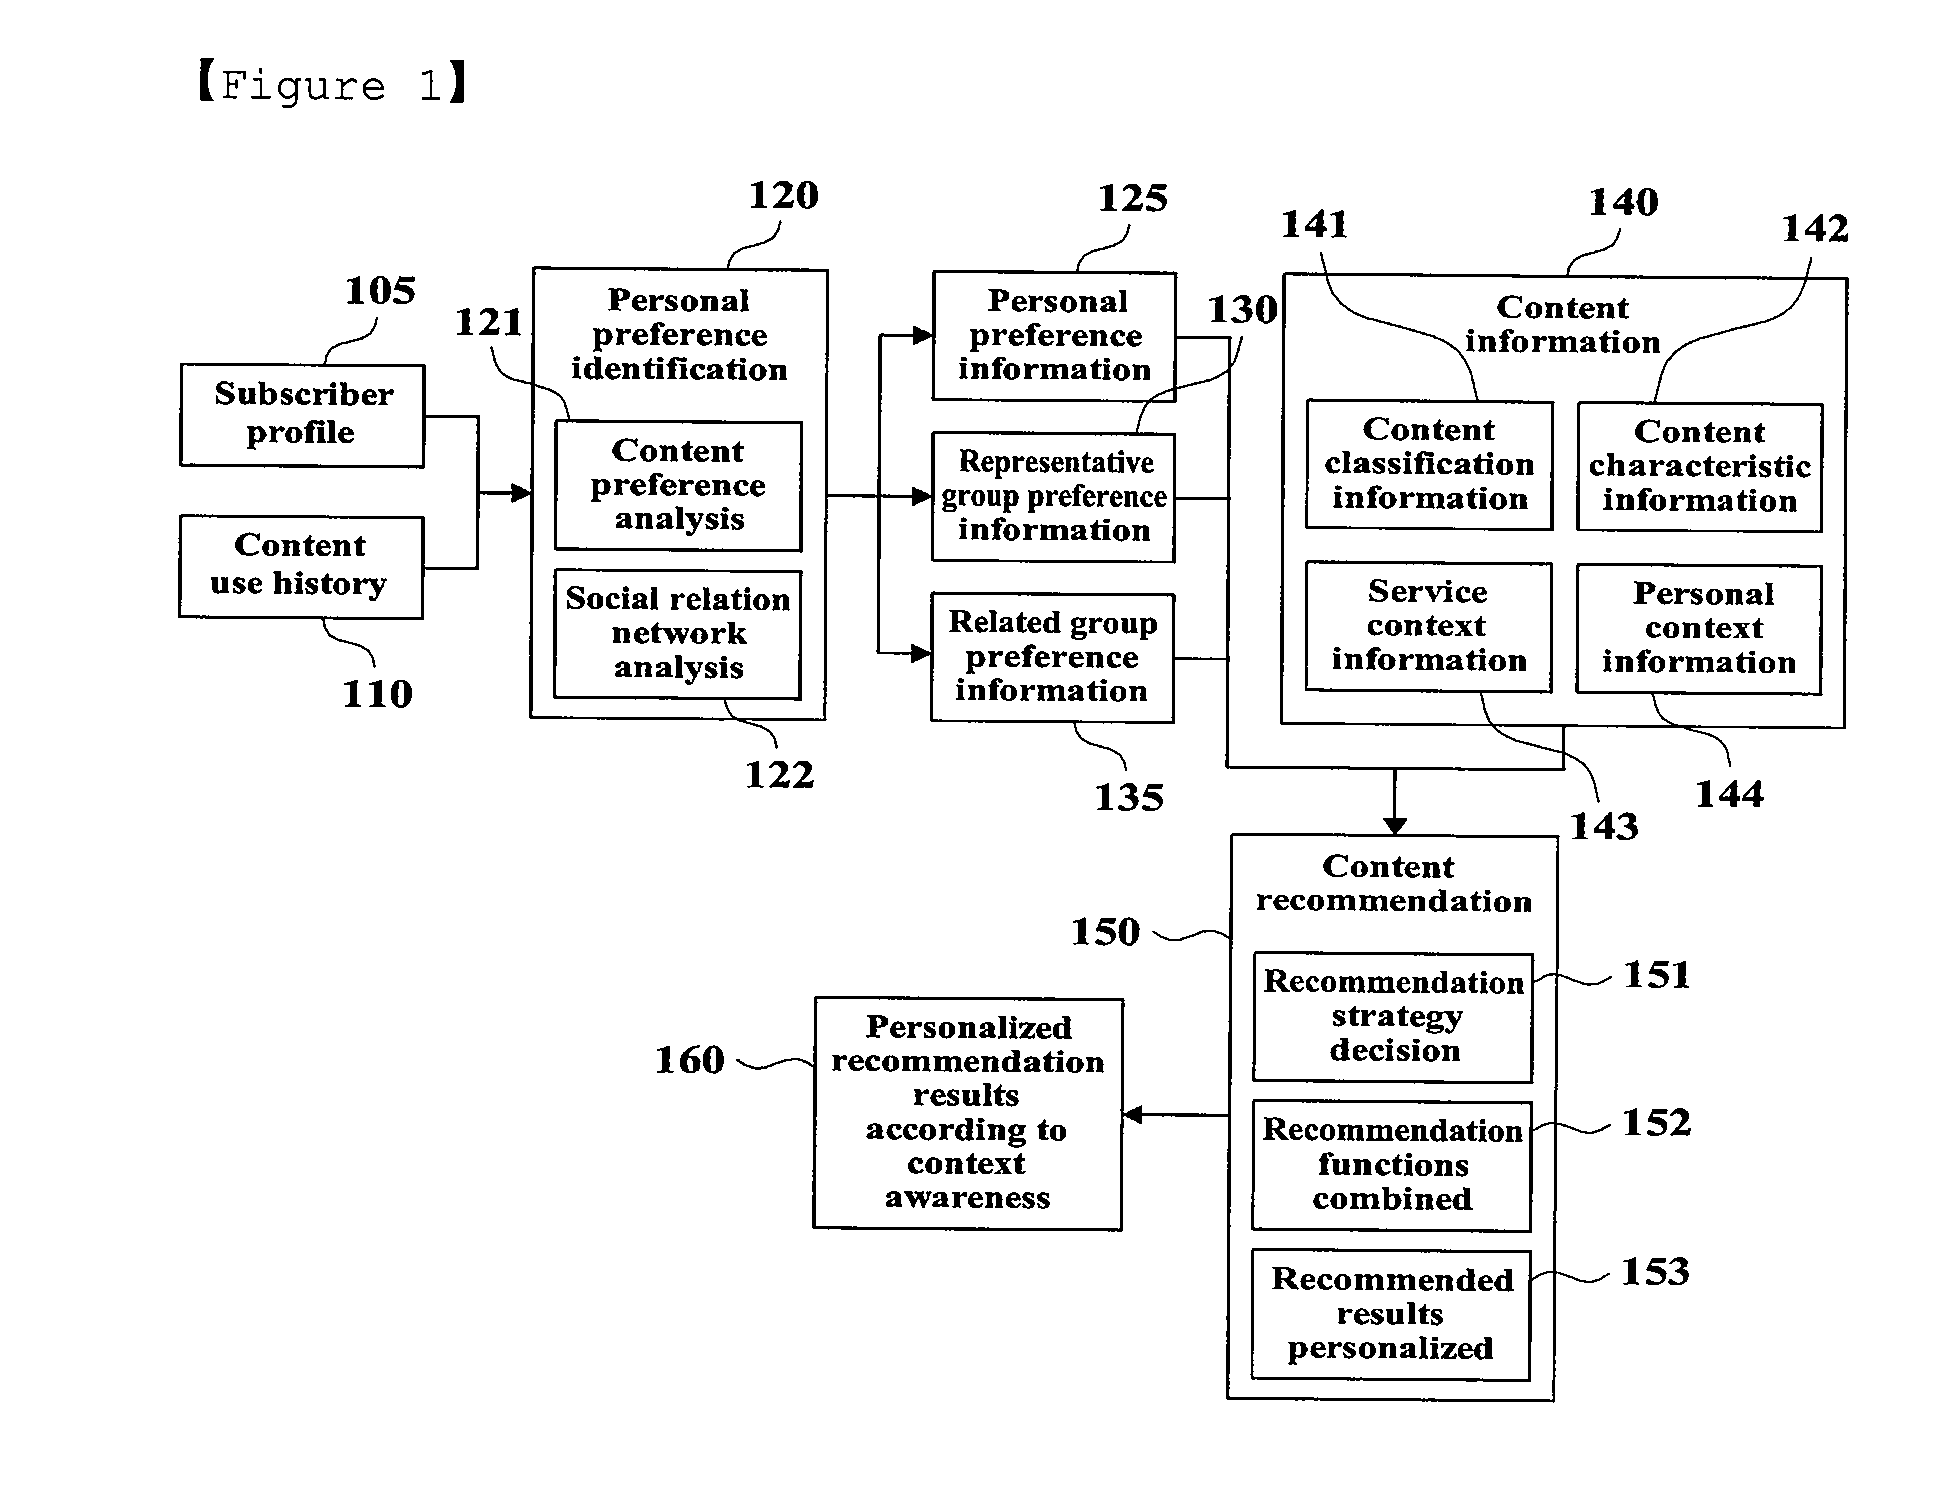 Apparatus and method for controlling hybrid motor